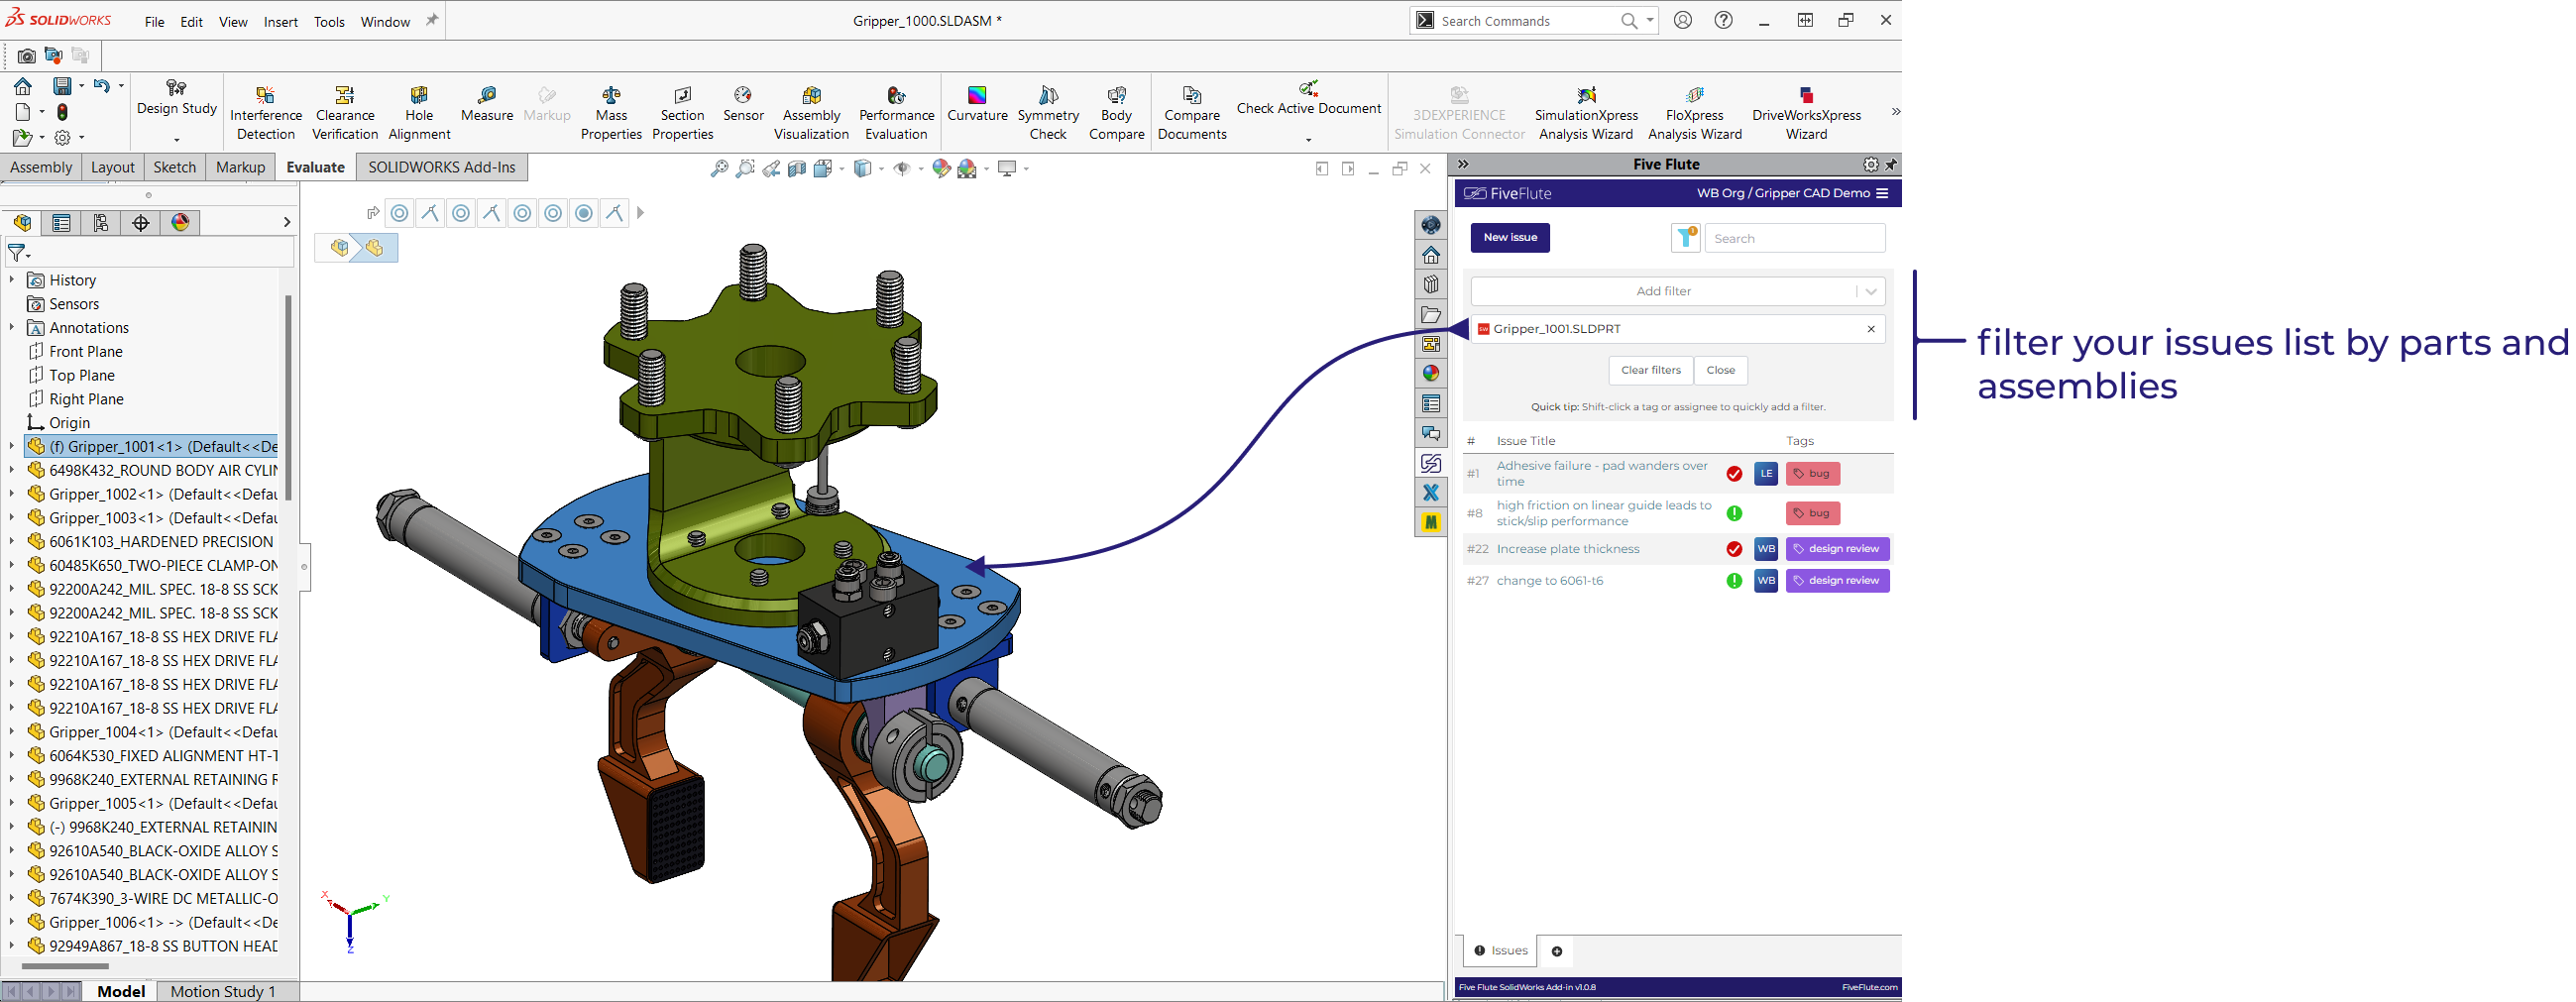 Five Flute SolidWorks add-in - filter by part functionality